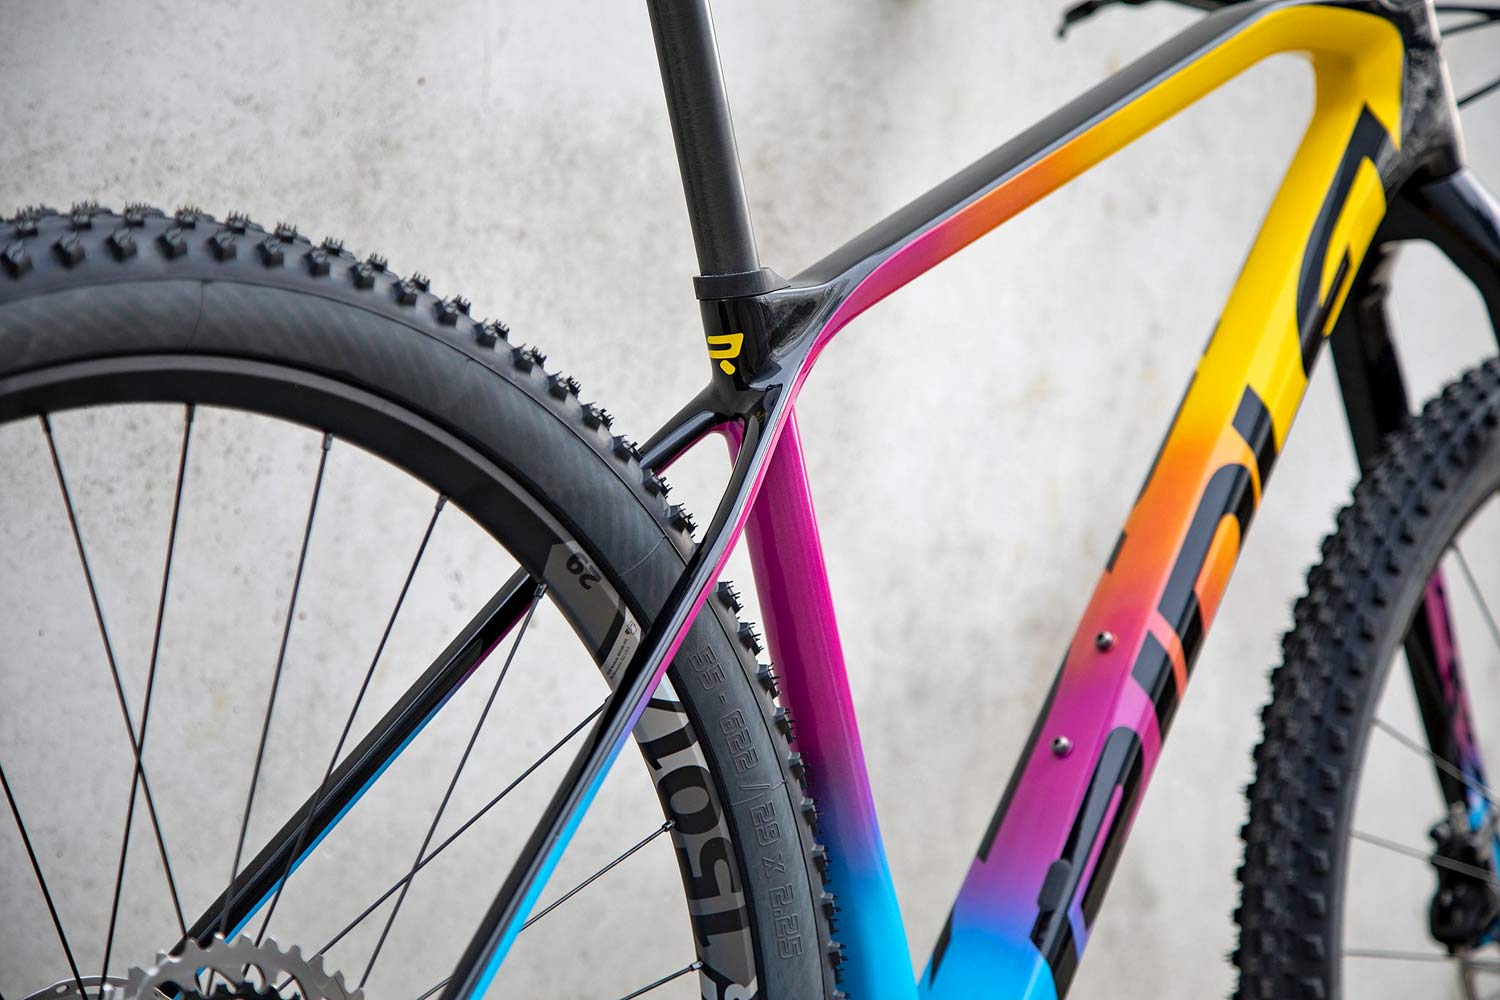 Ridley Ignite SLX carbon XC race hardtail, limited edition Special Designs lightweight carbon cross-country mountain bike